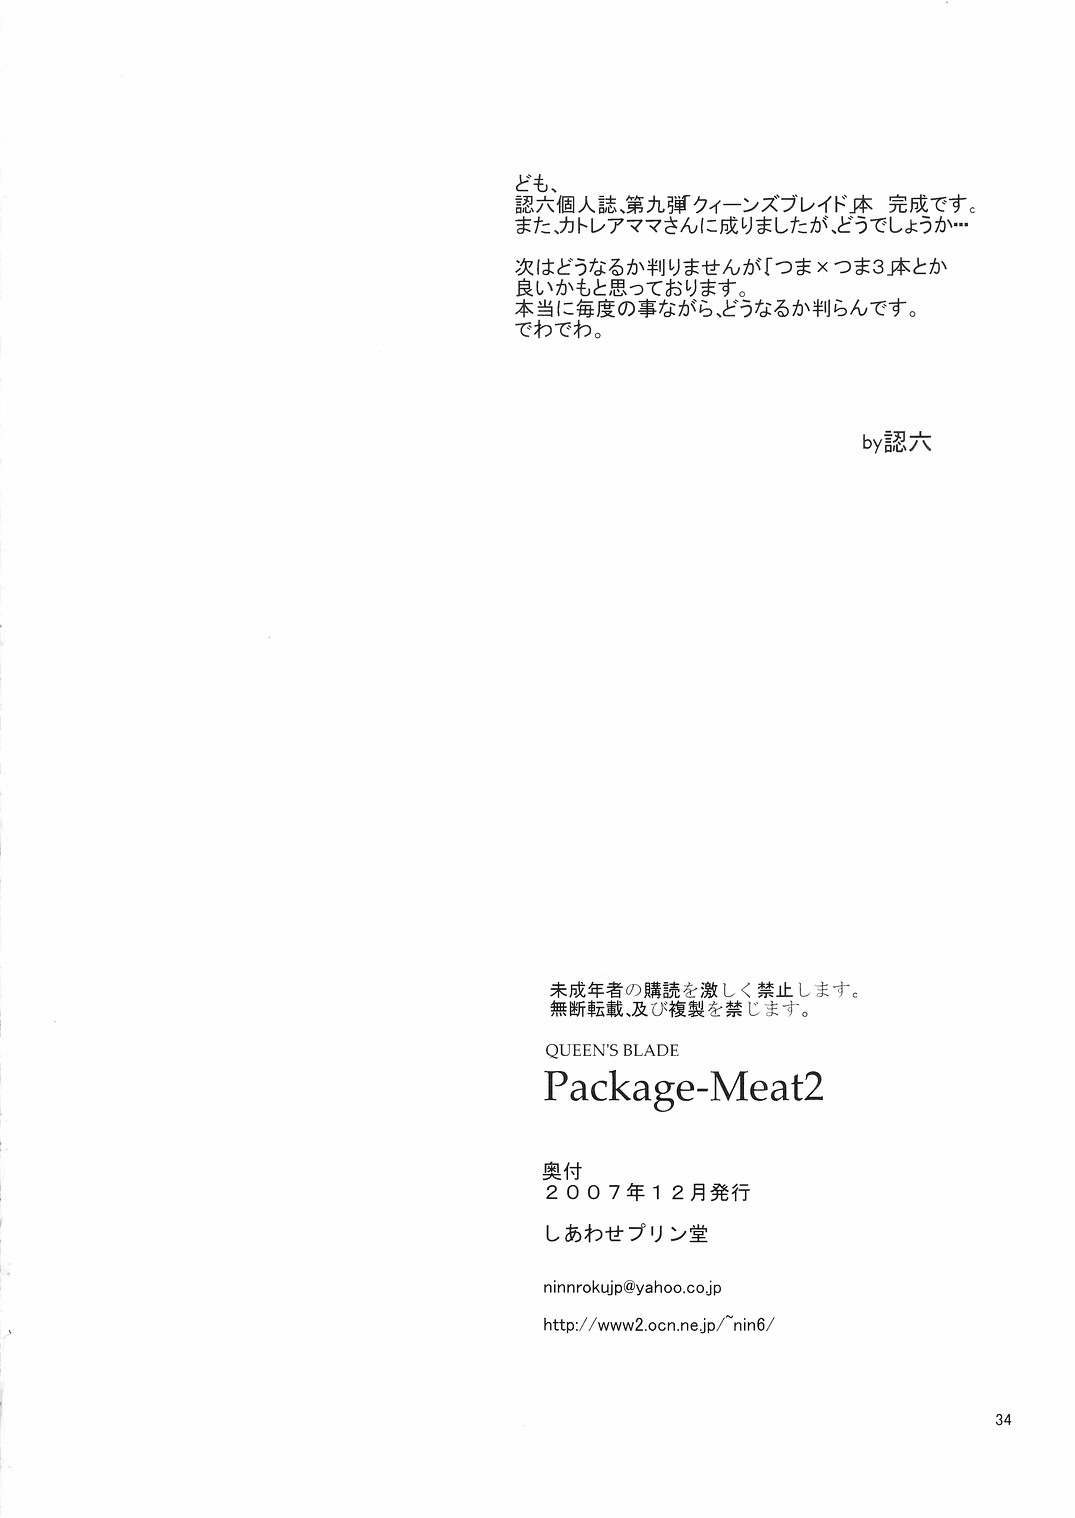 Package-Meat 2 numero d'image 33